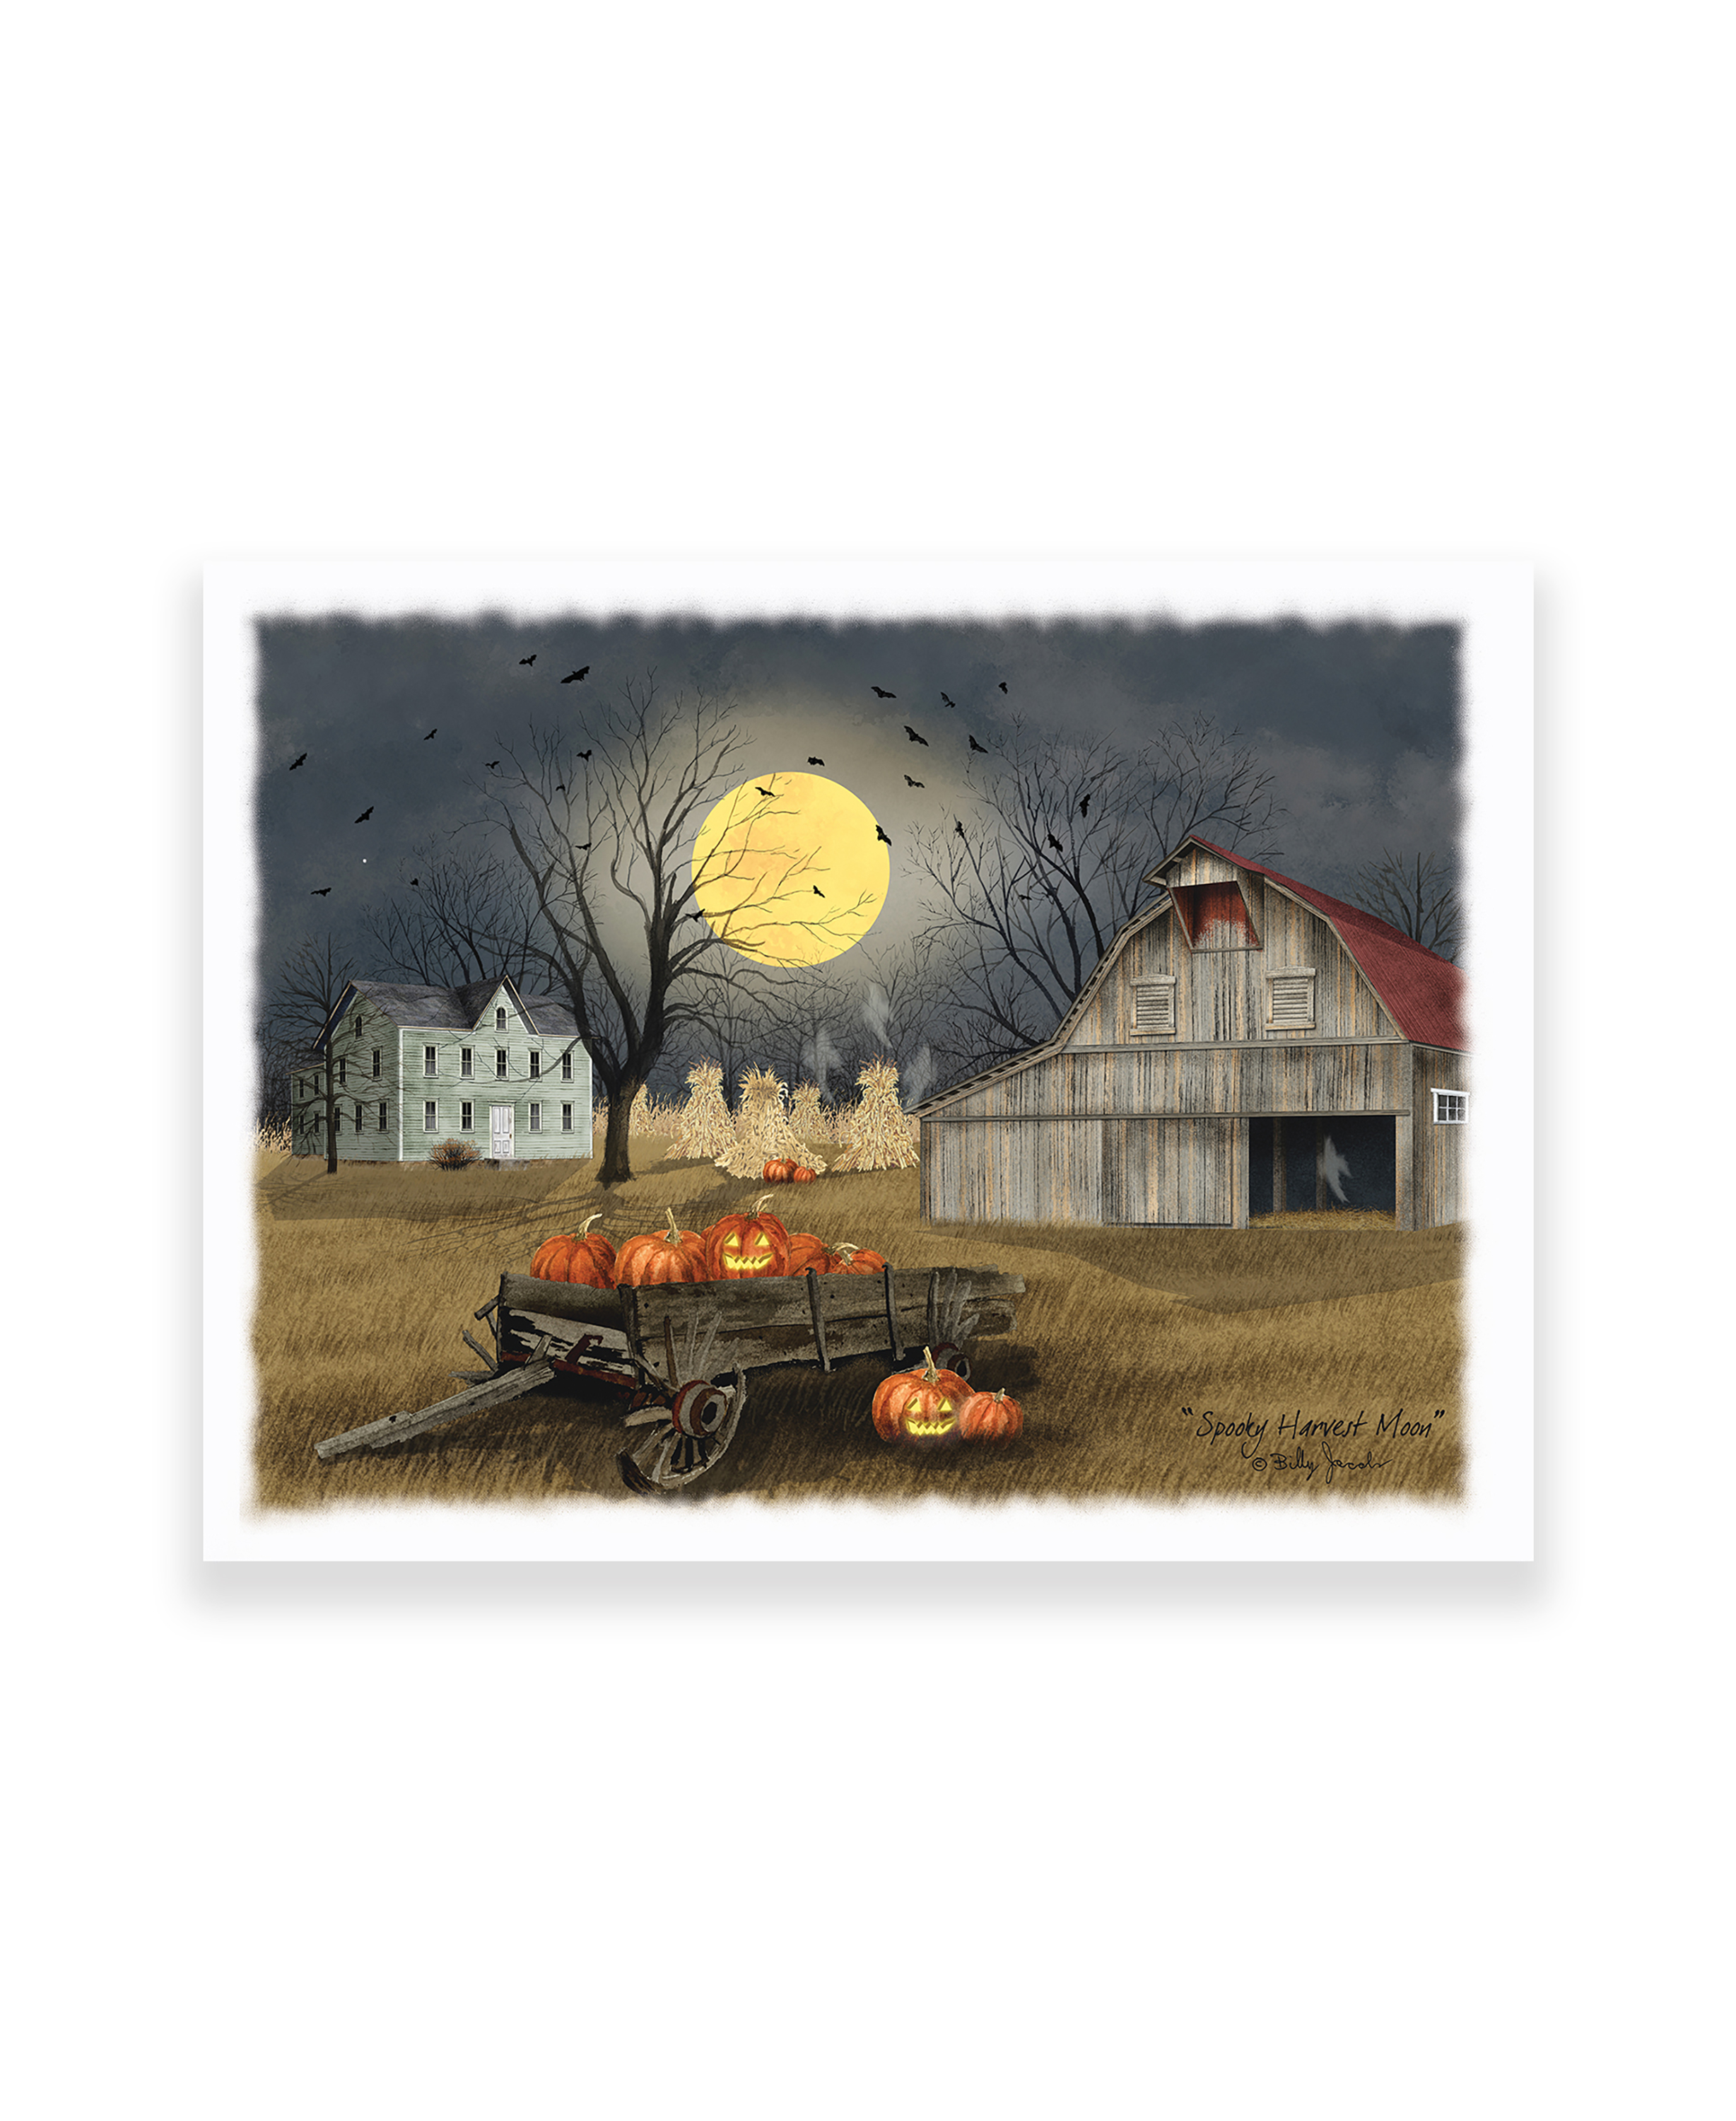 "Spooky Harvest Moon" by Billy Jacobs, Ready to Hang Canvas Art